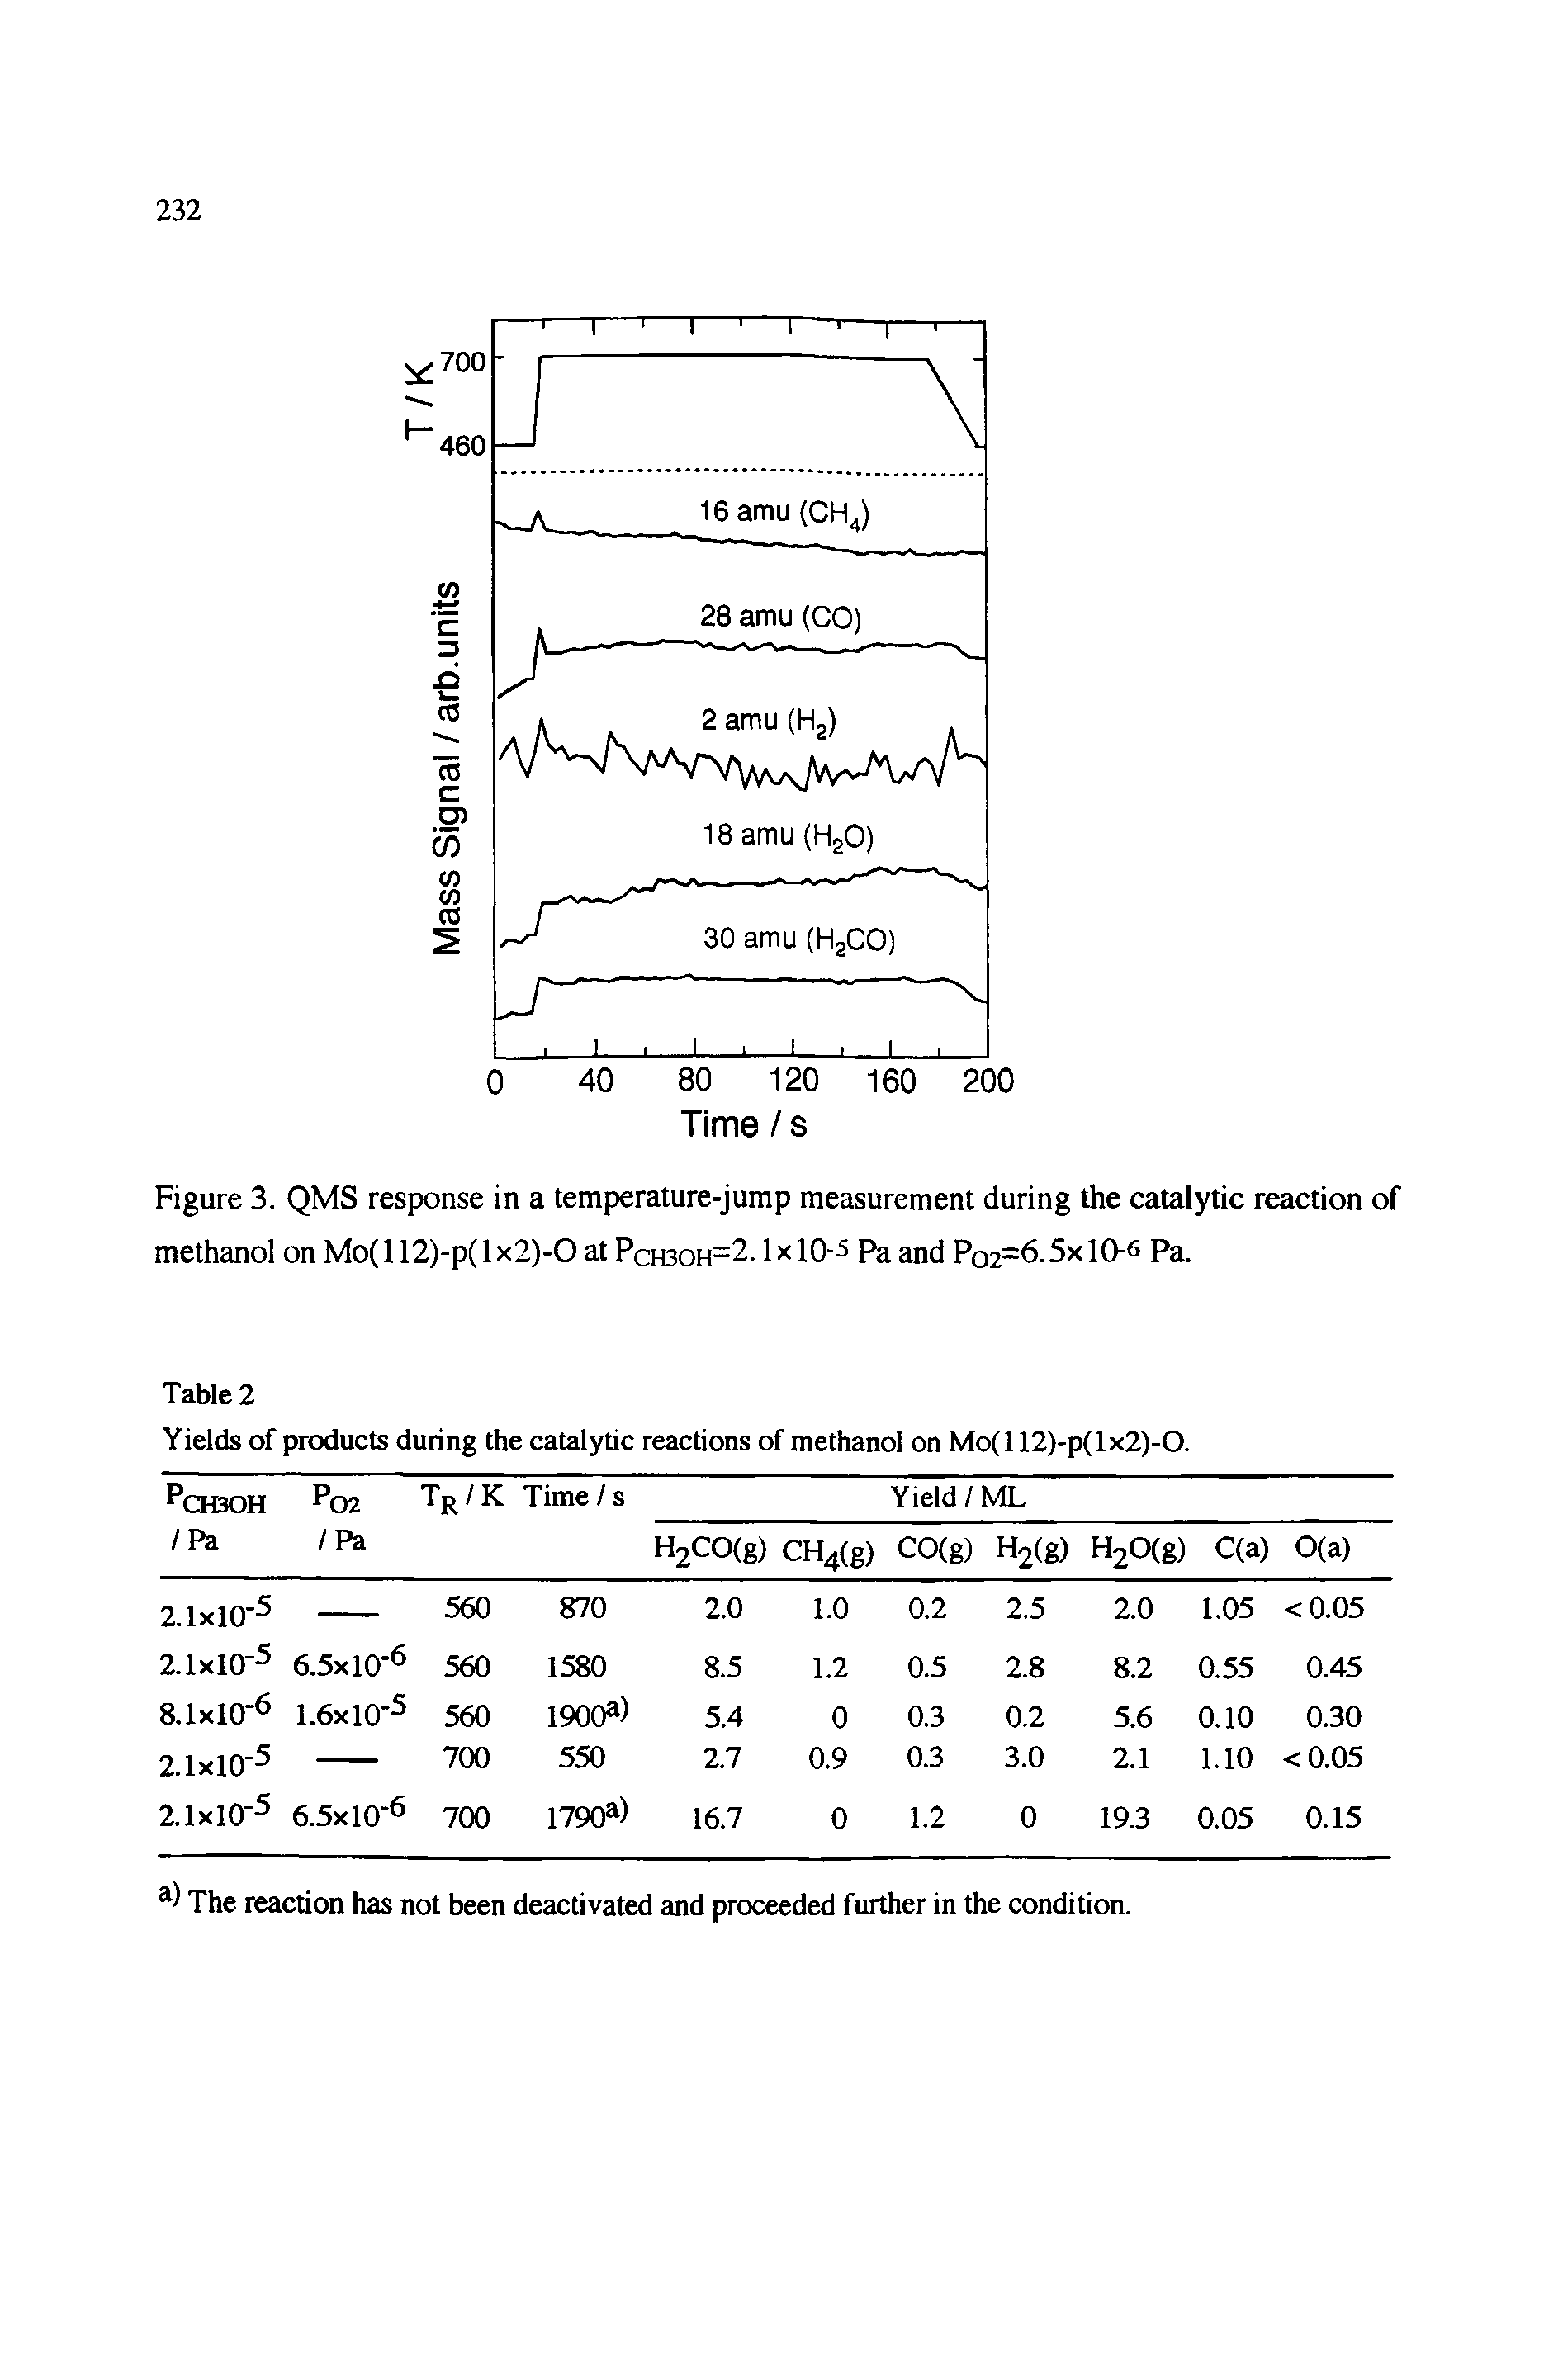 Figure 3. QMS response in a temperature-jump measurement during the catalytic reaction of methanol on Mo( 112)-p( 1 x2)-0 at Pch30H=2. 1 x 10-5 Pa and Pq2=6.5x 10-6 pa.